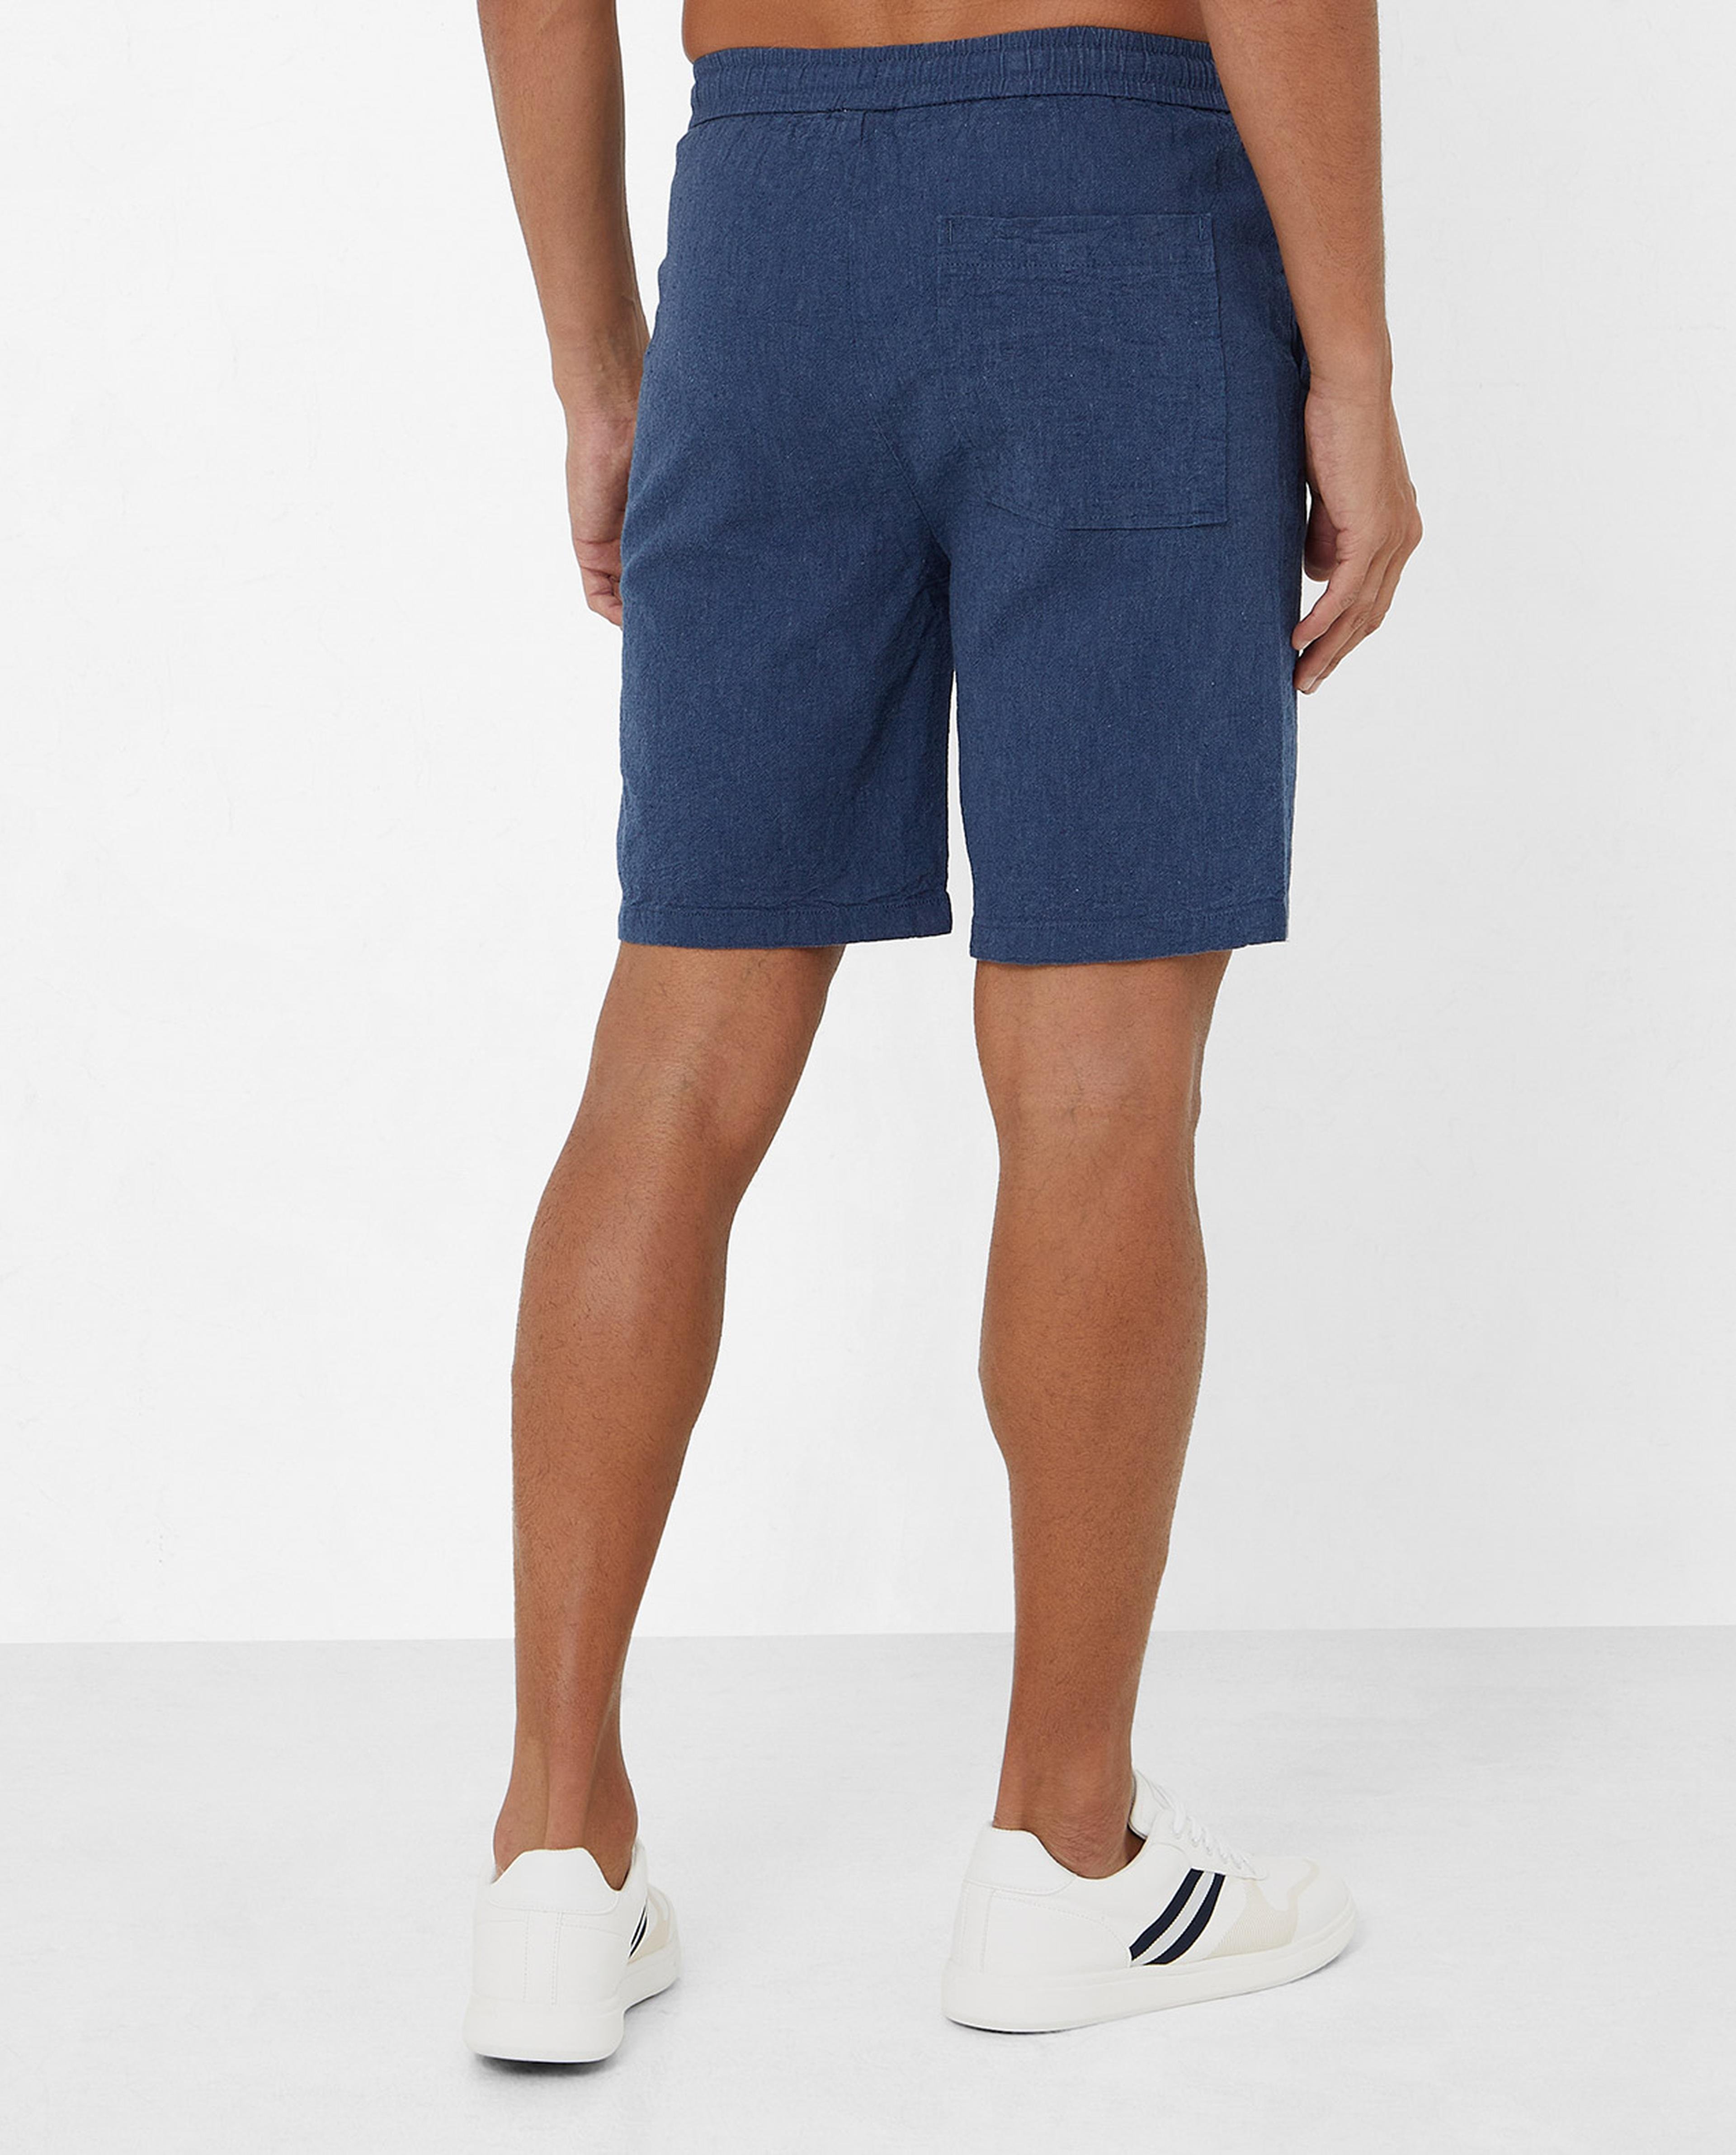 Solid Casual Shorts with Elasticated Drawstring Waist